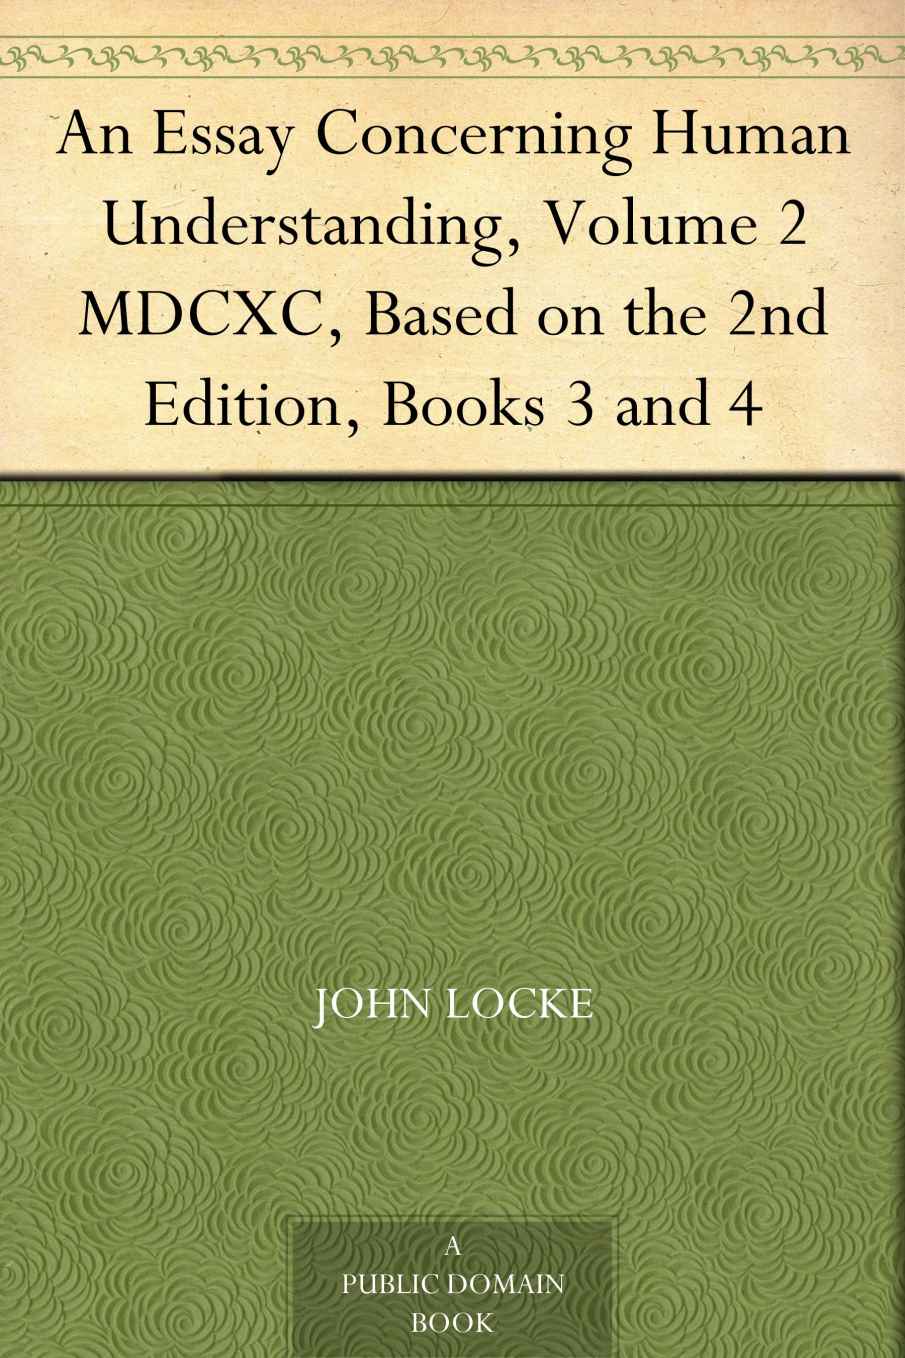 An Essay Concerning Human Understanding, Volume 2 MDCXC, Based on the 2nd Edition, Books 3 and 4